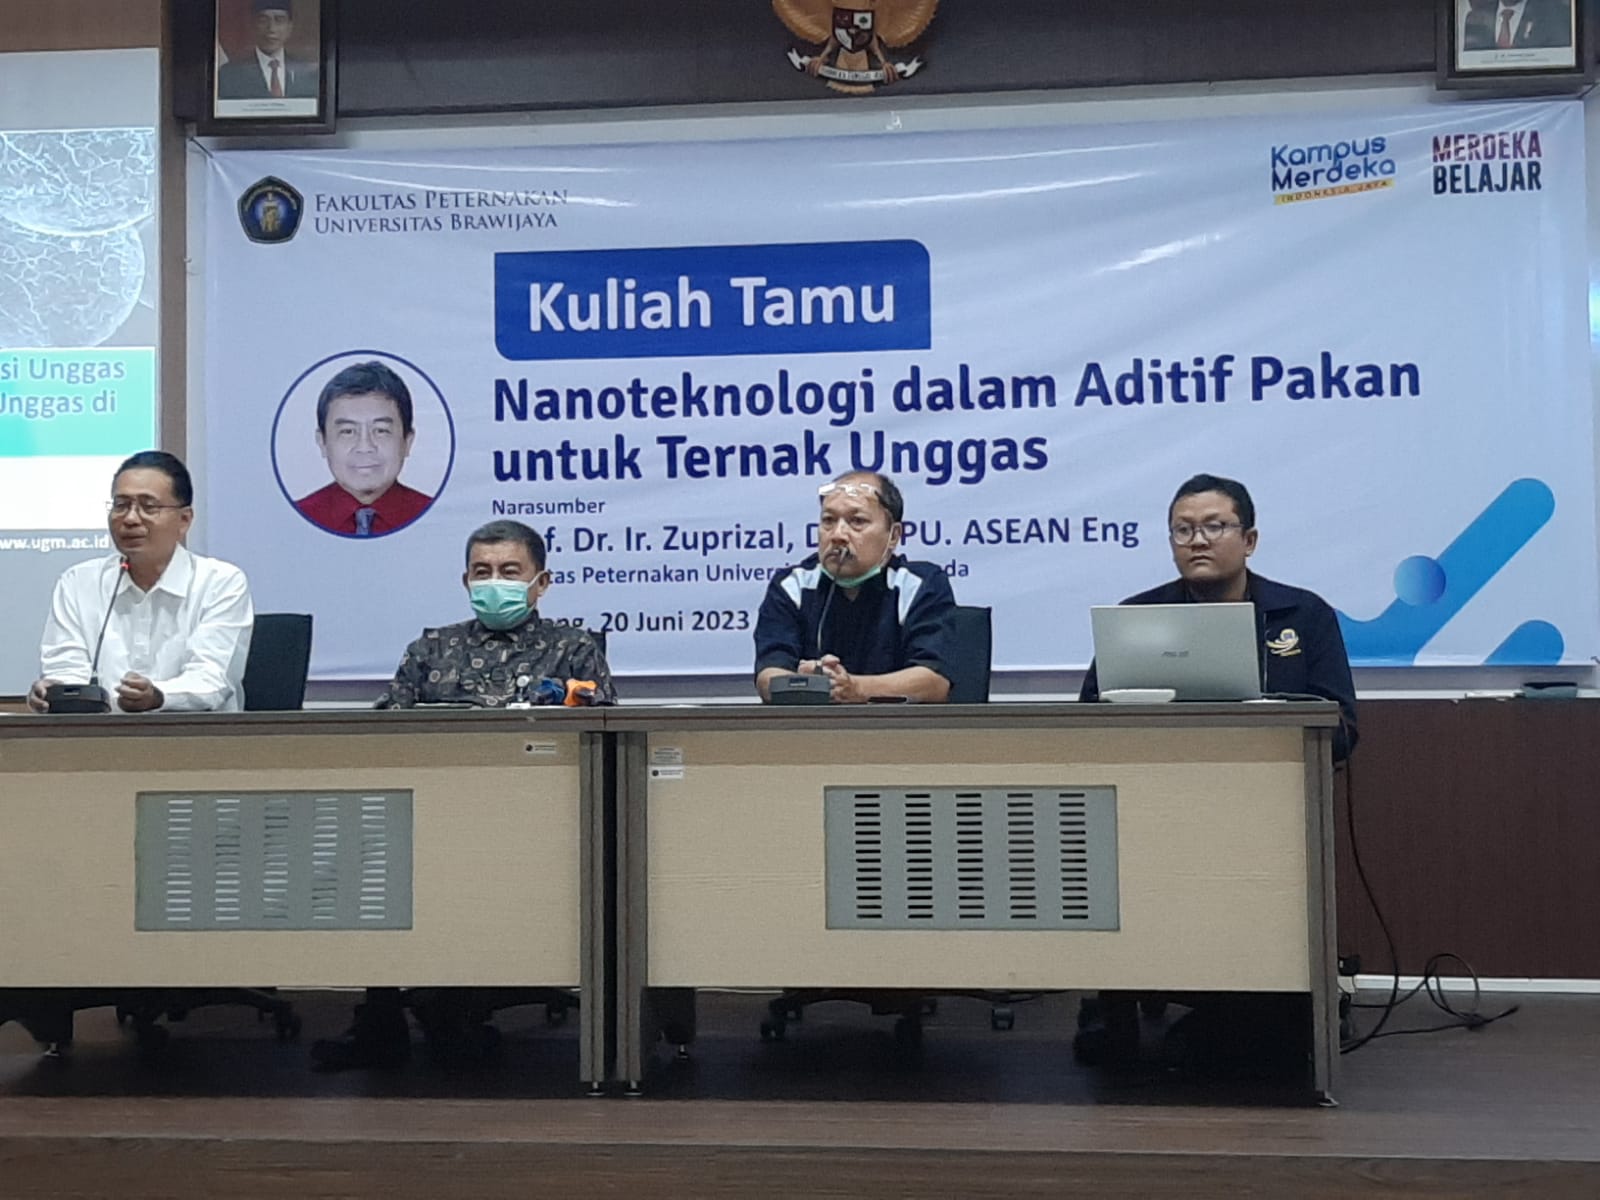 Faculty of Animal Science UGM Lecturer Shares Knowledge about Nanotechnology in Poultry Feed Additives